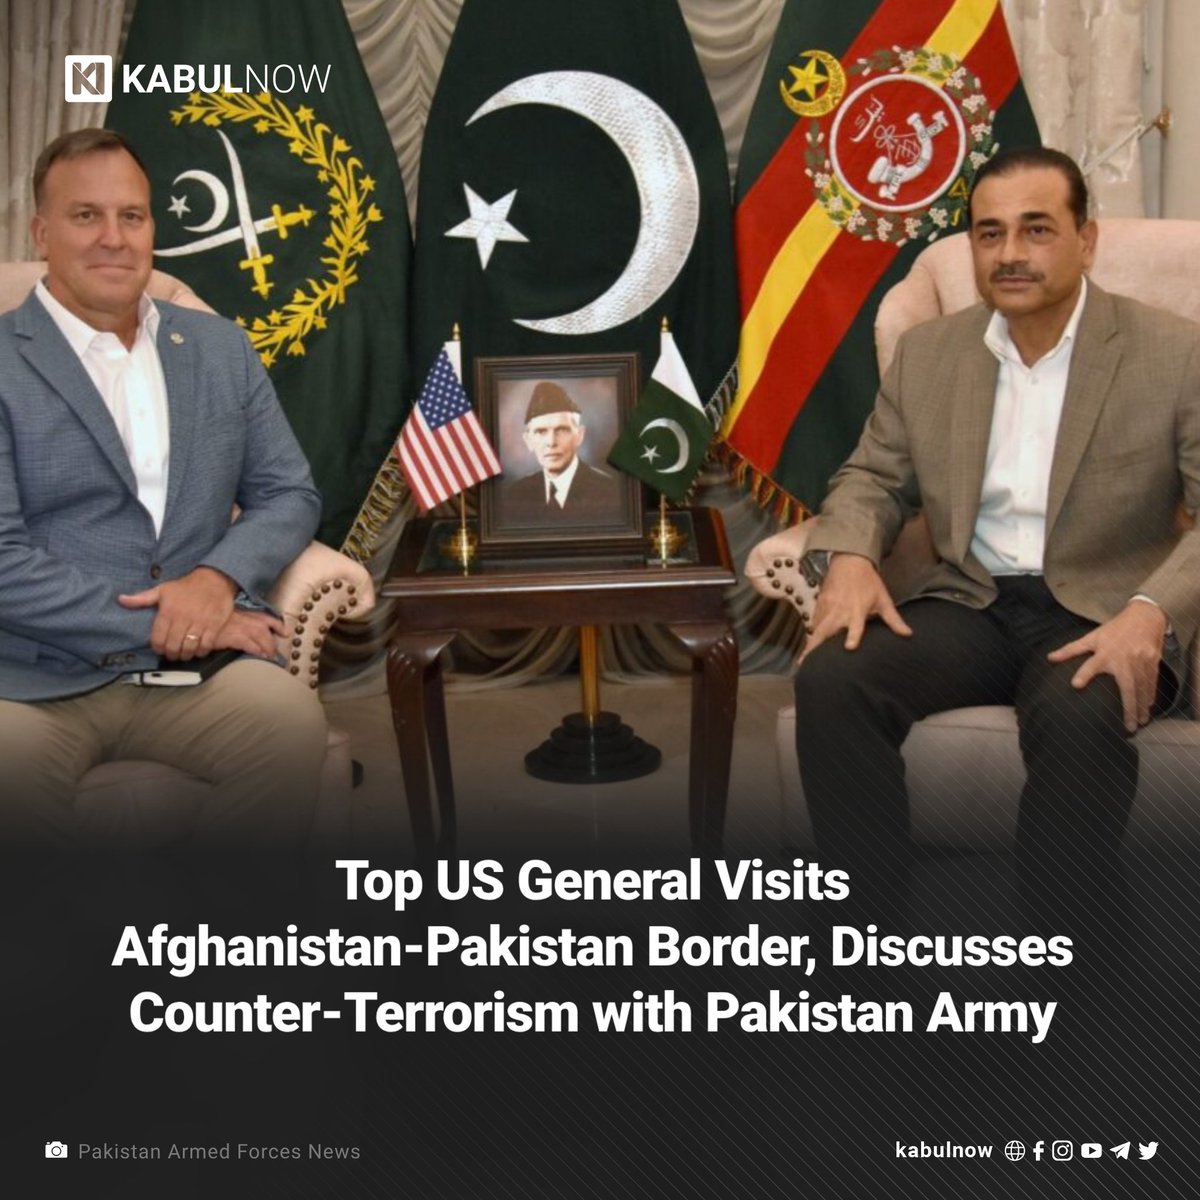 The US Central Command (CENTCOM) Chief, General Michael Erik Kurilla, has visited Pakistan-Afghanistan border areas in Pakistan’s Khyber Pakhtunkhwa province, discussing counter-terrorism operations with the Pakistani military. Read more here: kabulnow.com/?p=35655